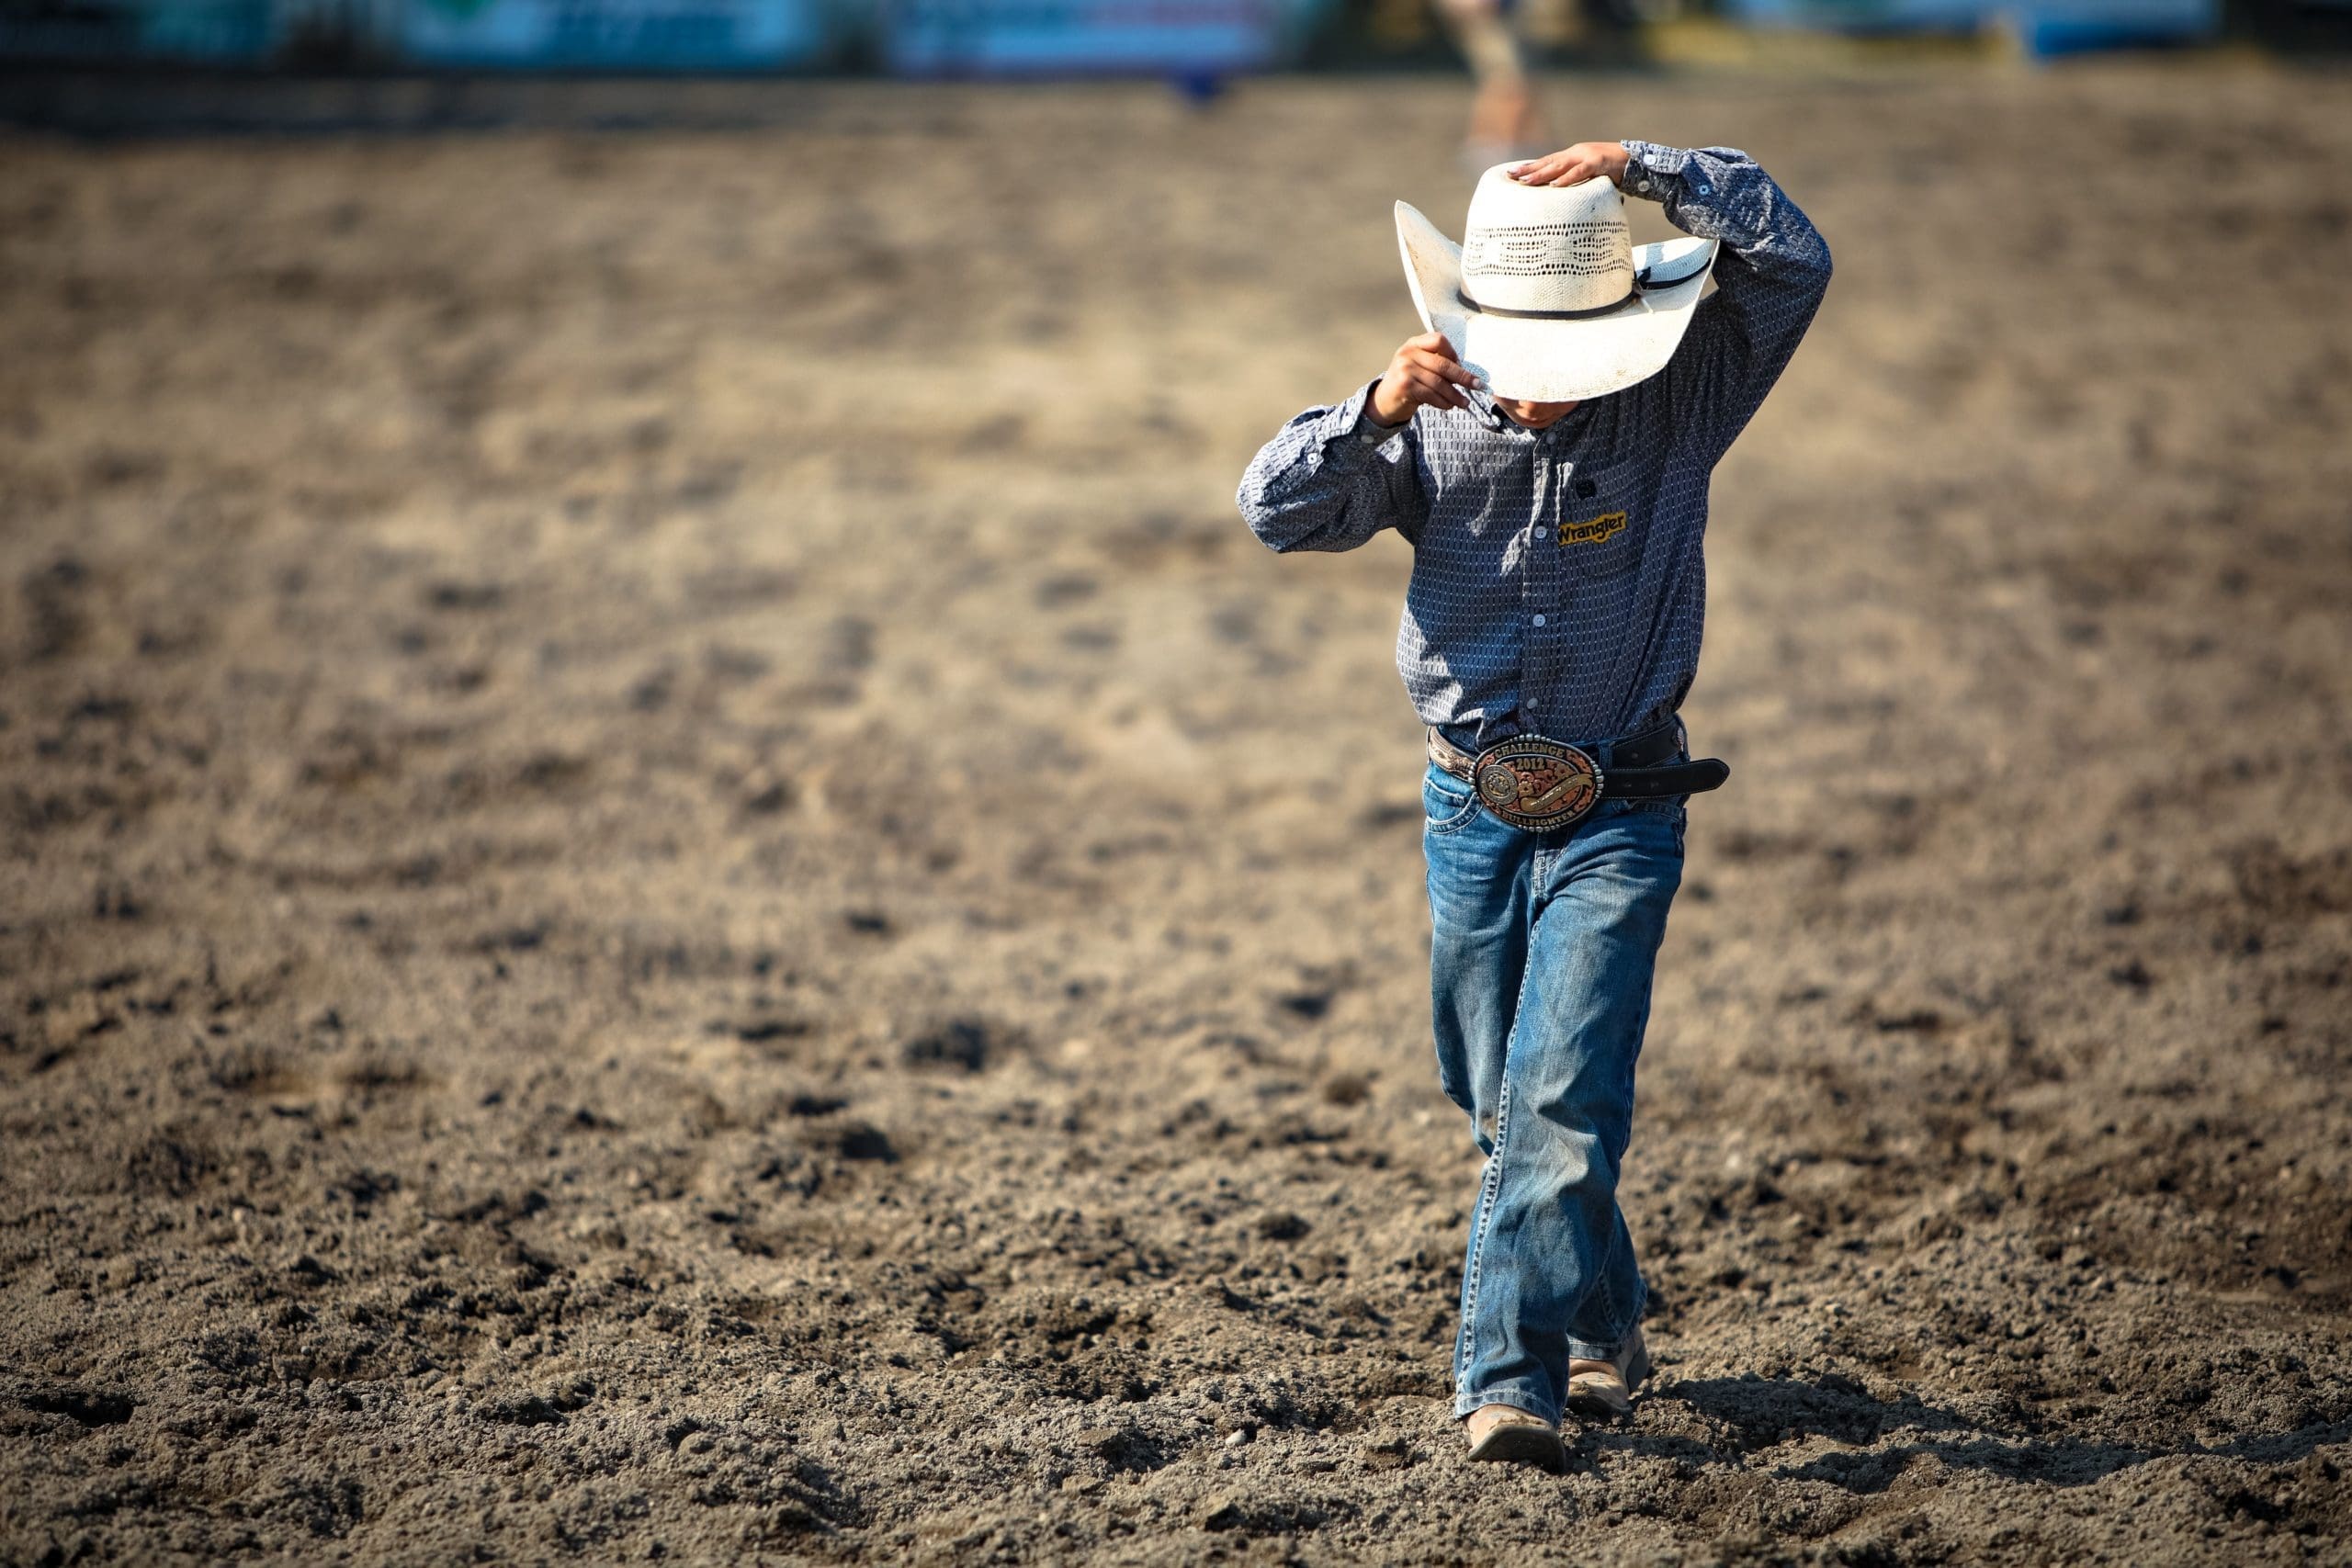 National Day of the Cowboy - Cochrane Lions Rodeo